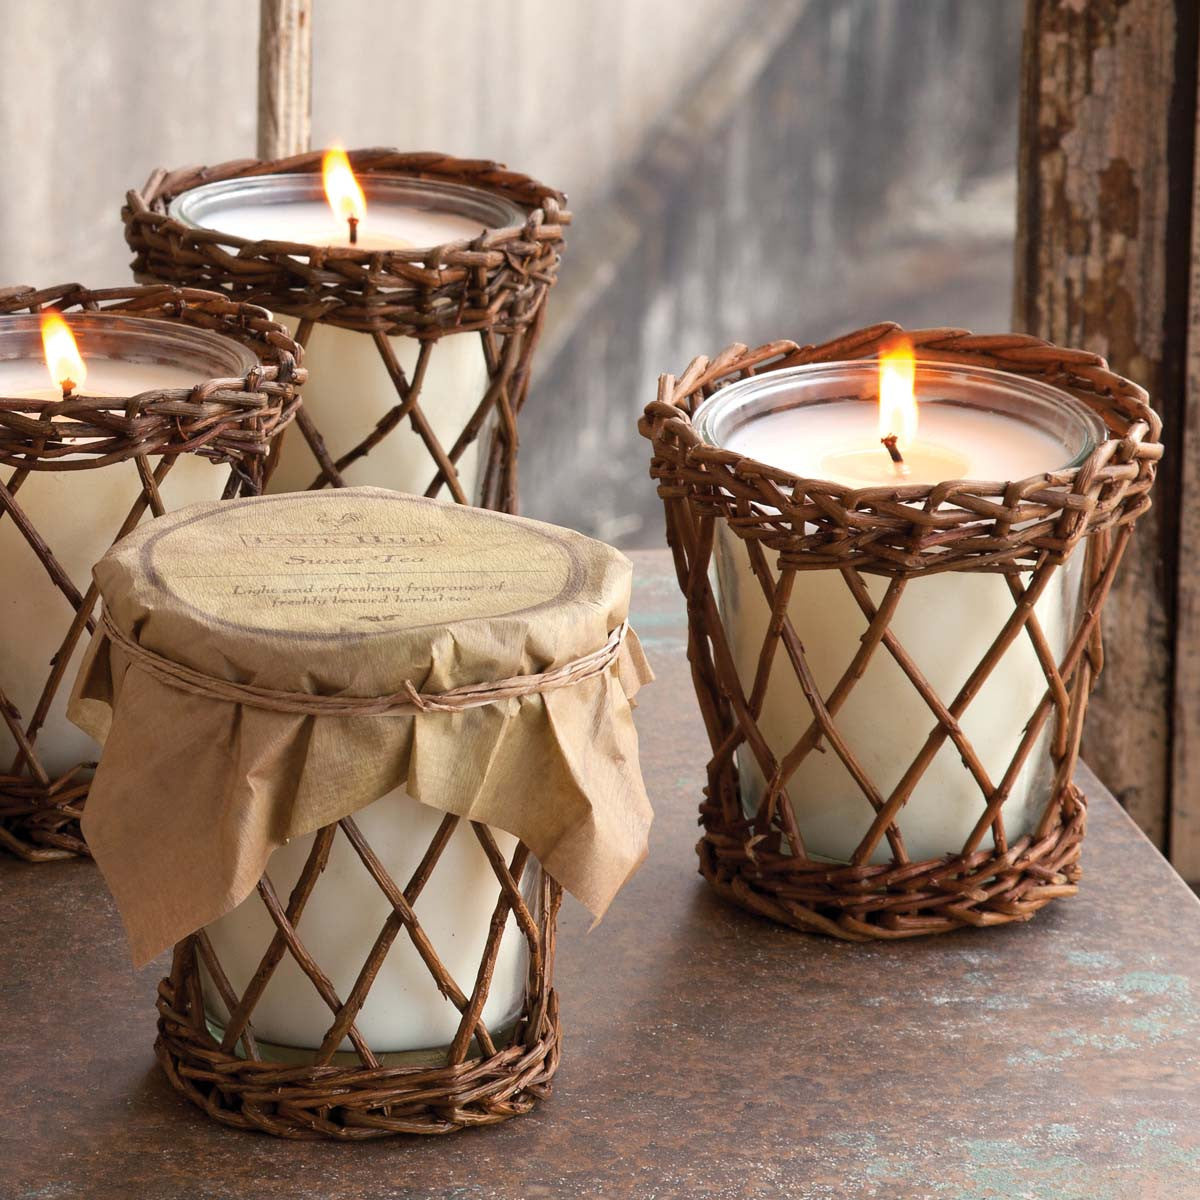 Autumn Gatherings Candle